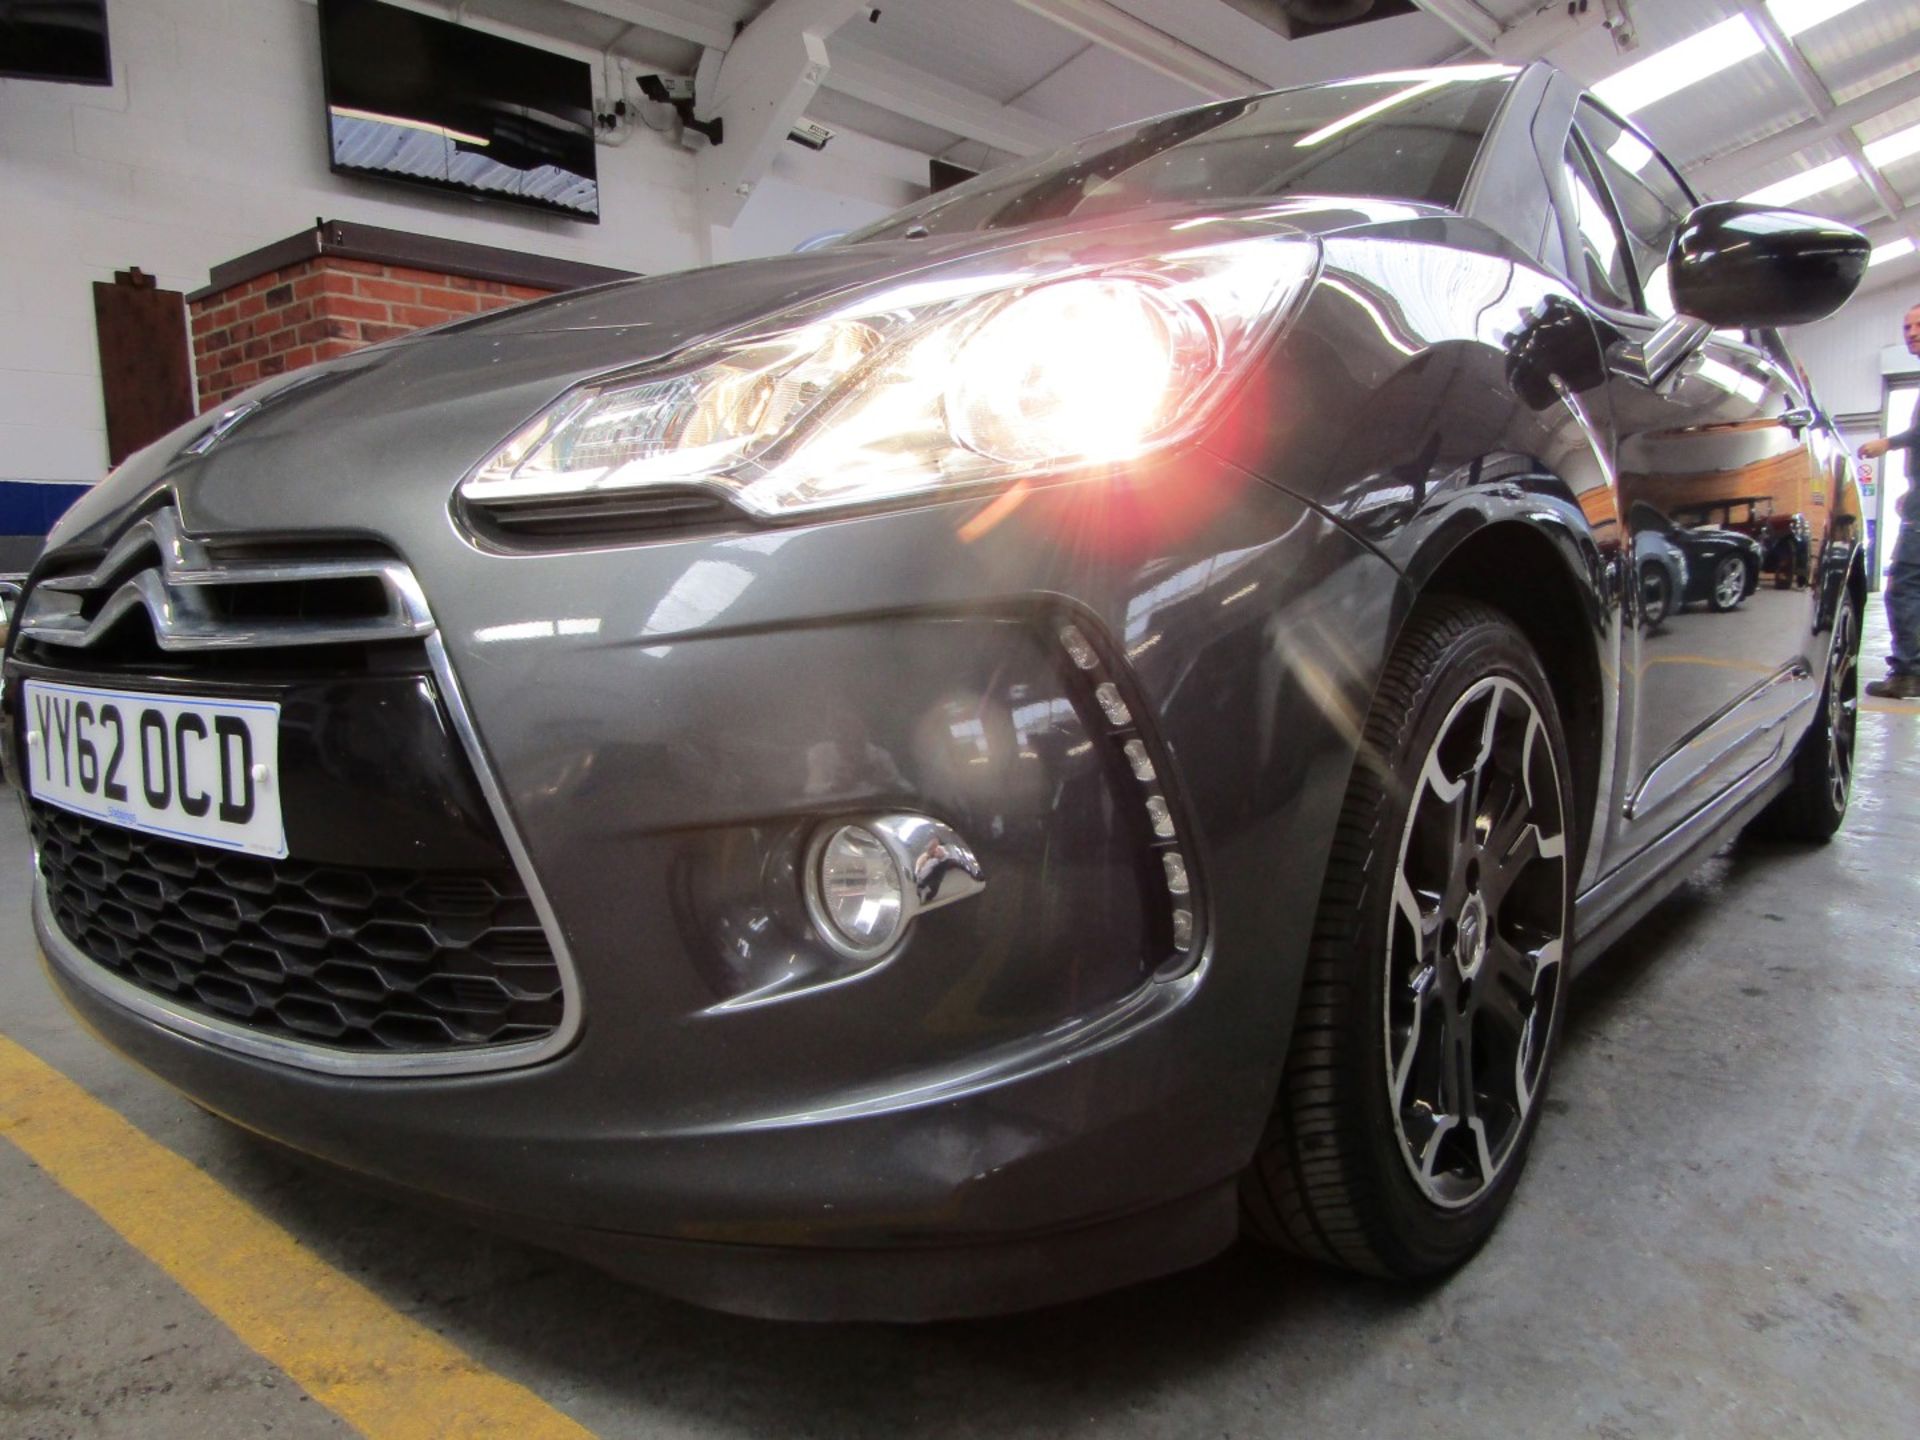 12 62 Citroen DS3 D STYLE E HDI - Image 4 of 12